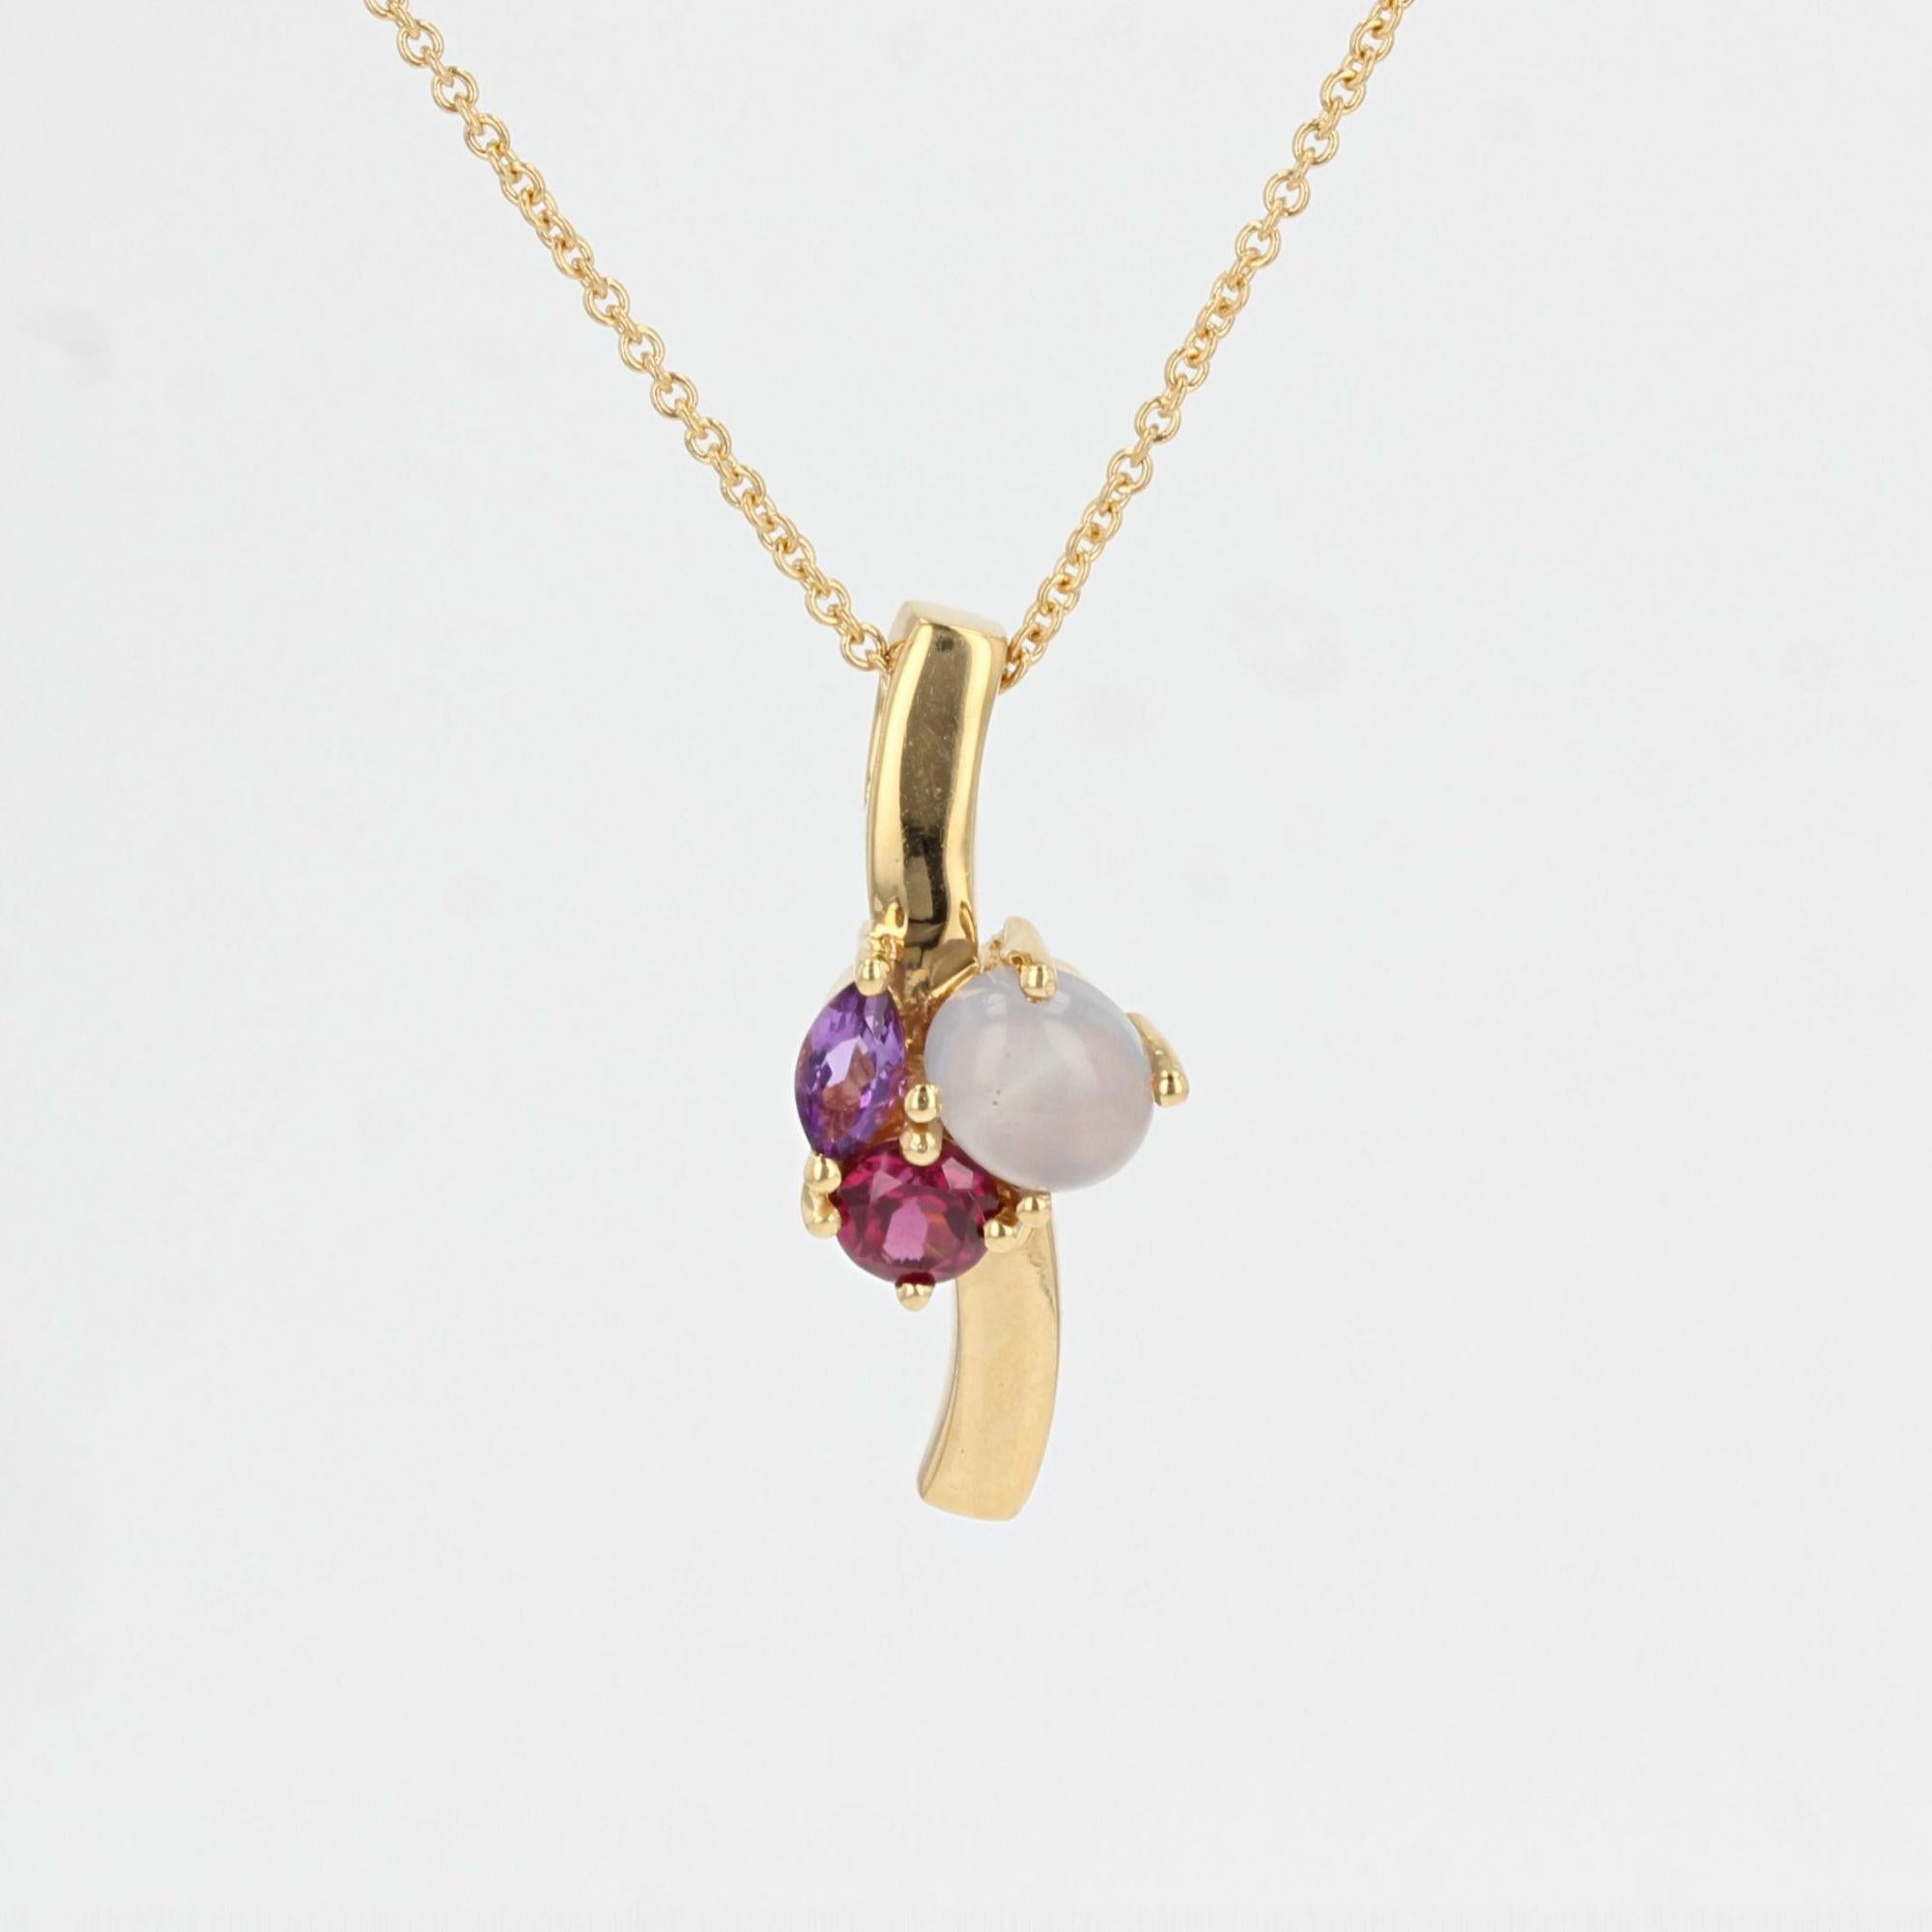 Cabochon Modern Gemstone 18 Karat Yellow Gold Pendant and Chain For Sale